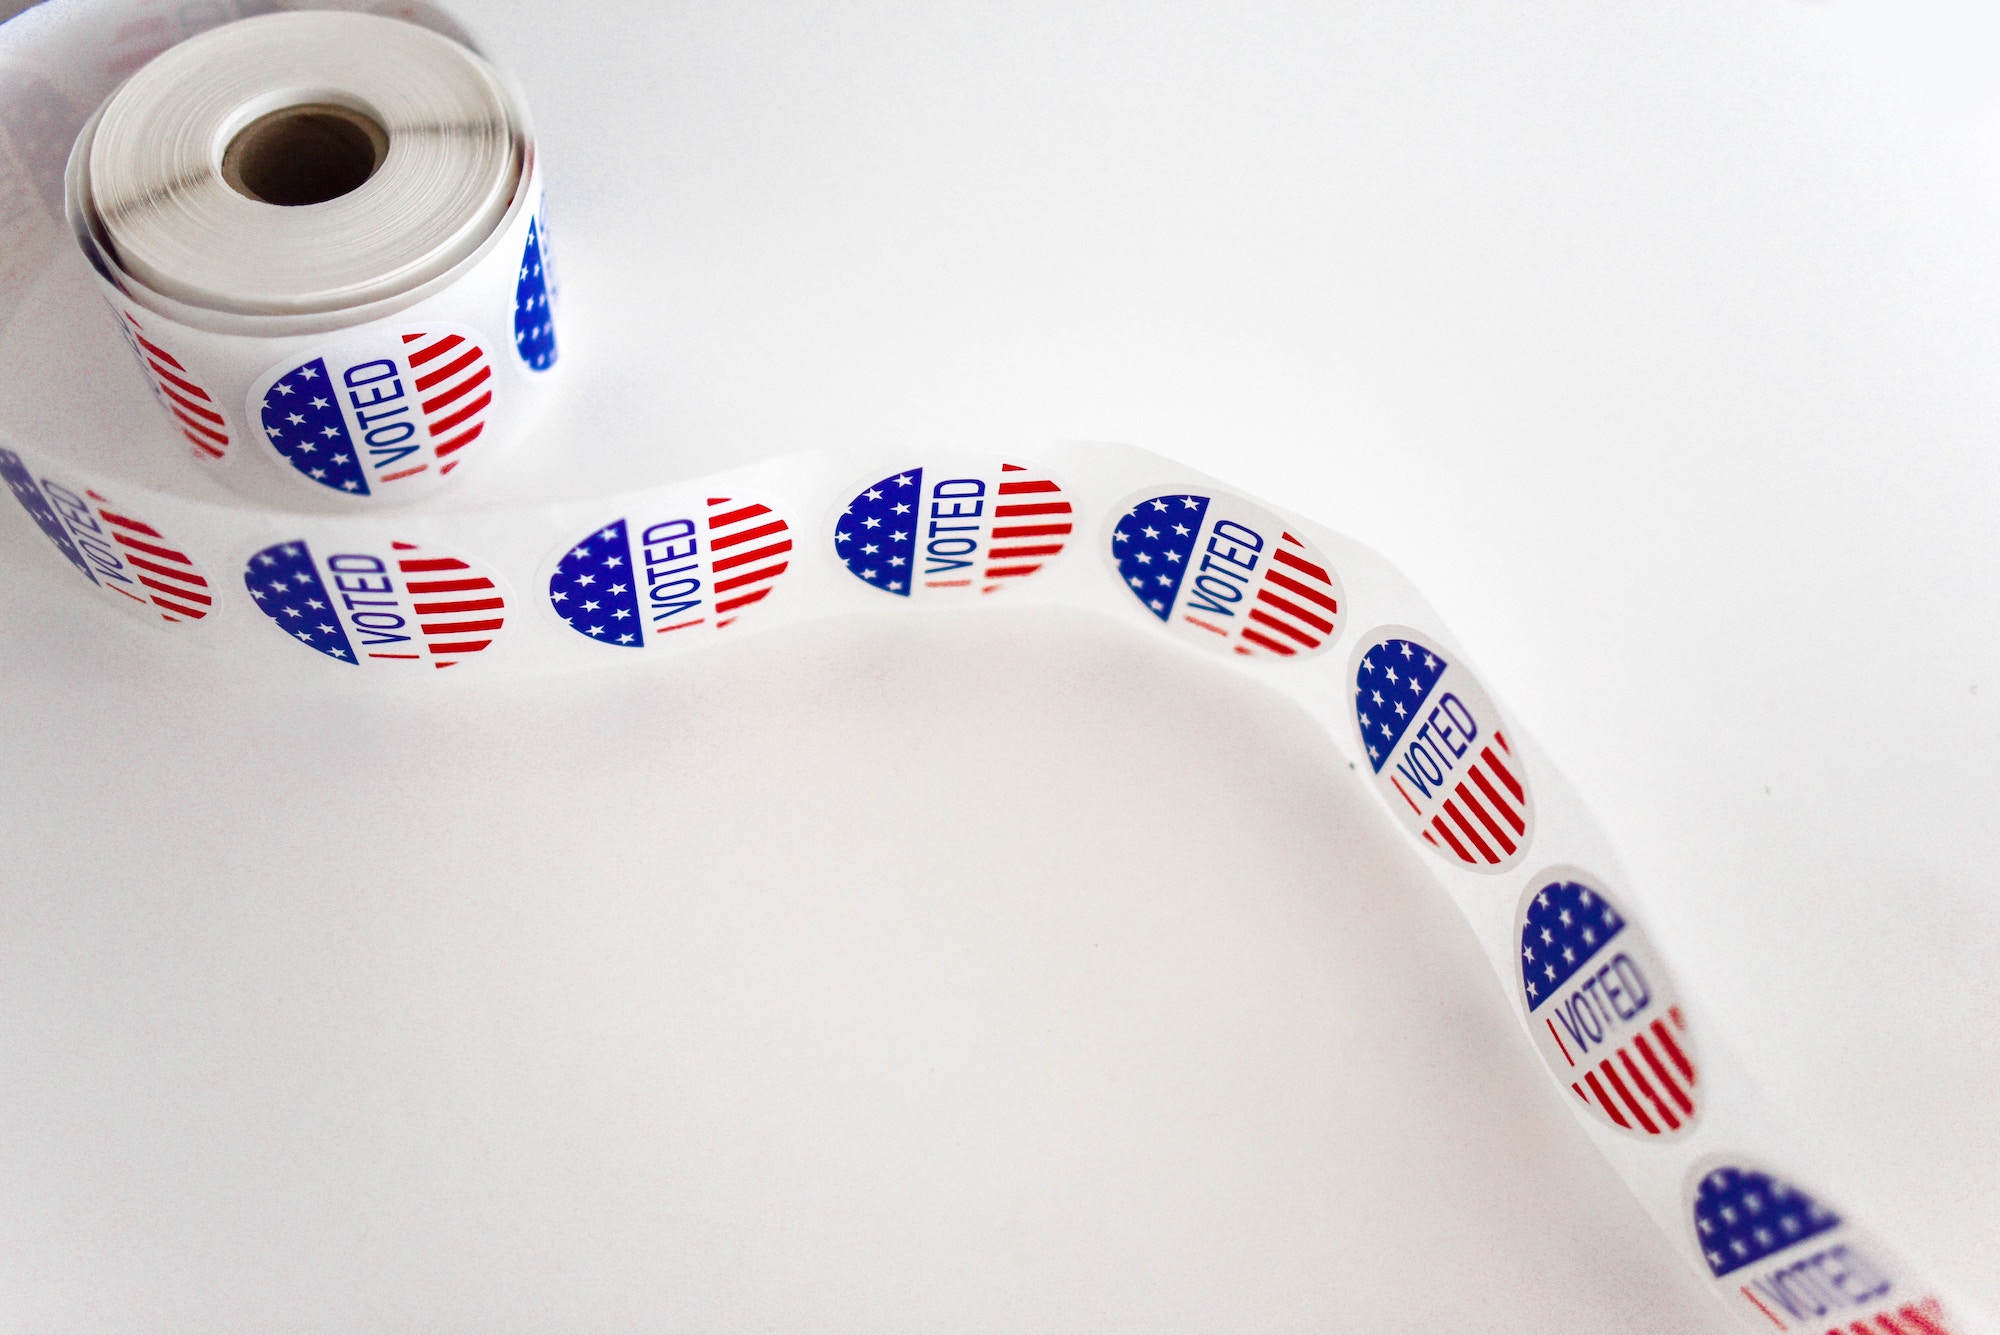 A roll of "I Voted" stickers on a white background.